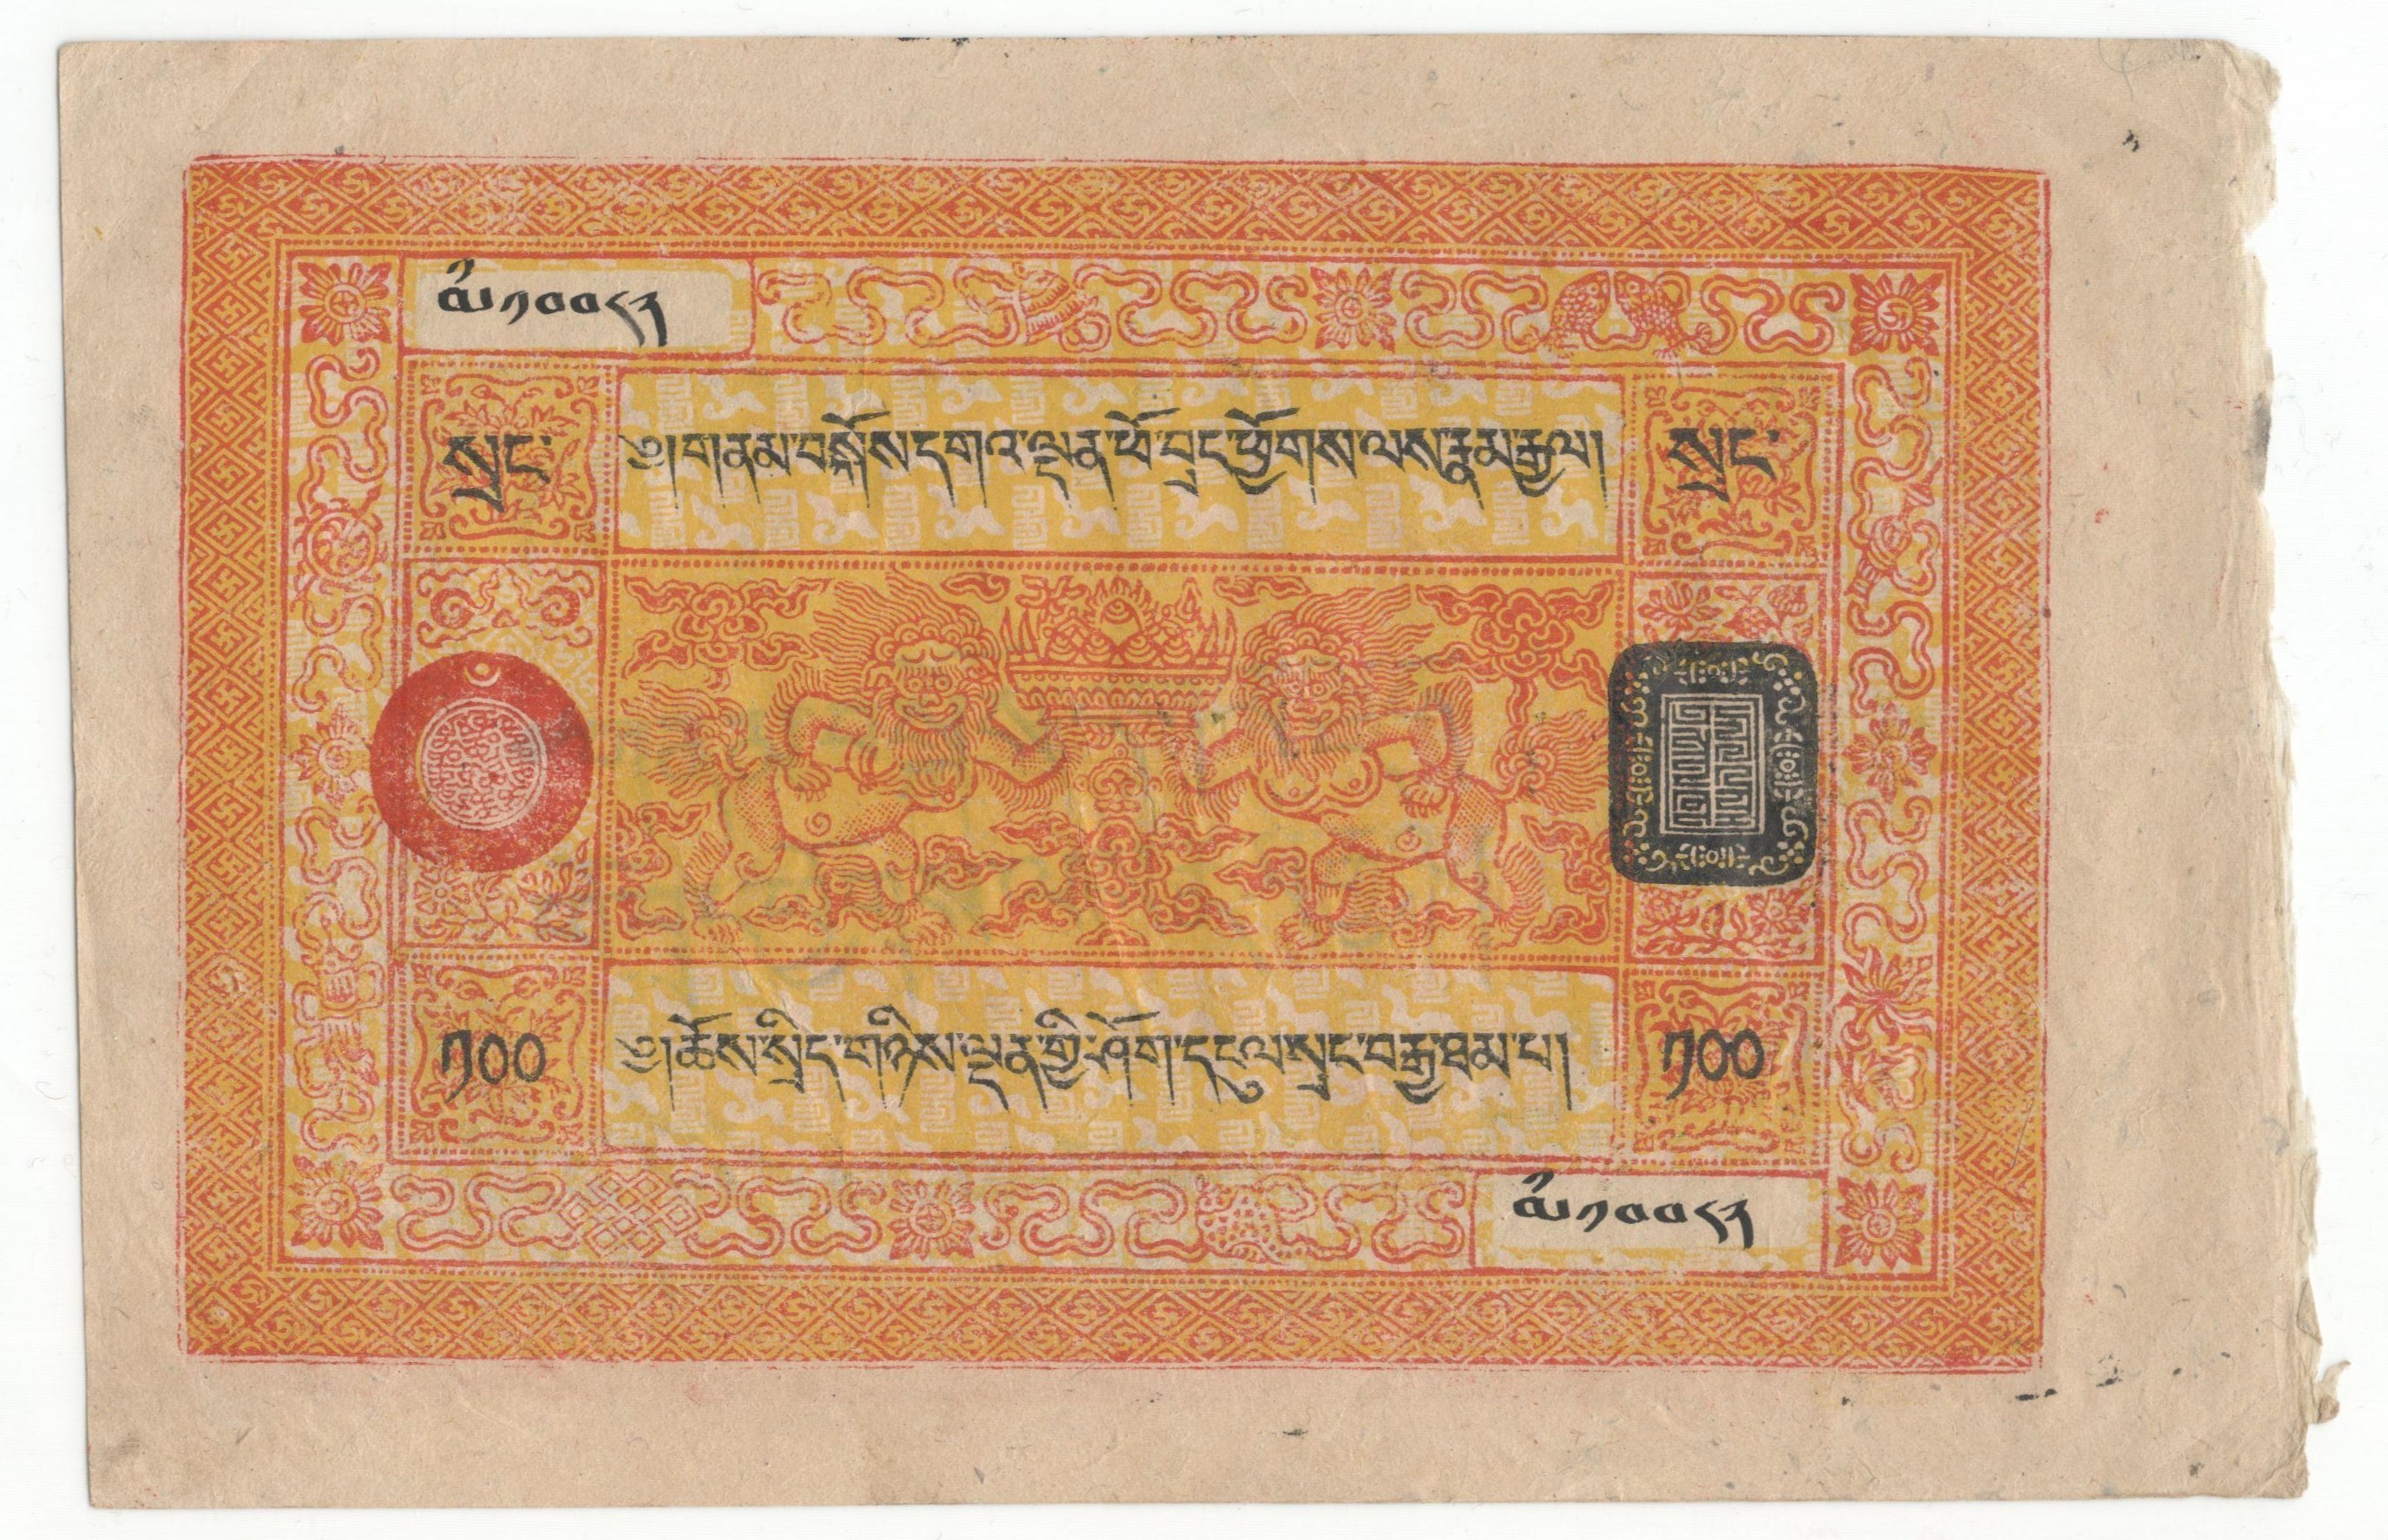 TIBET BANKNOTE IN ACCEPTABLE CONDITION App.size: 21.5cm x 14cm